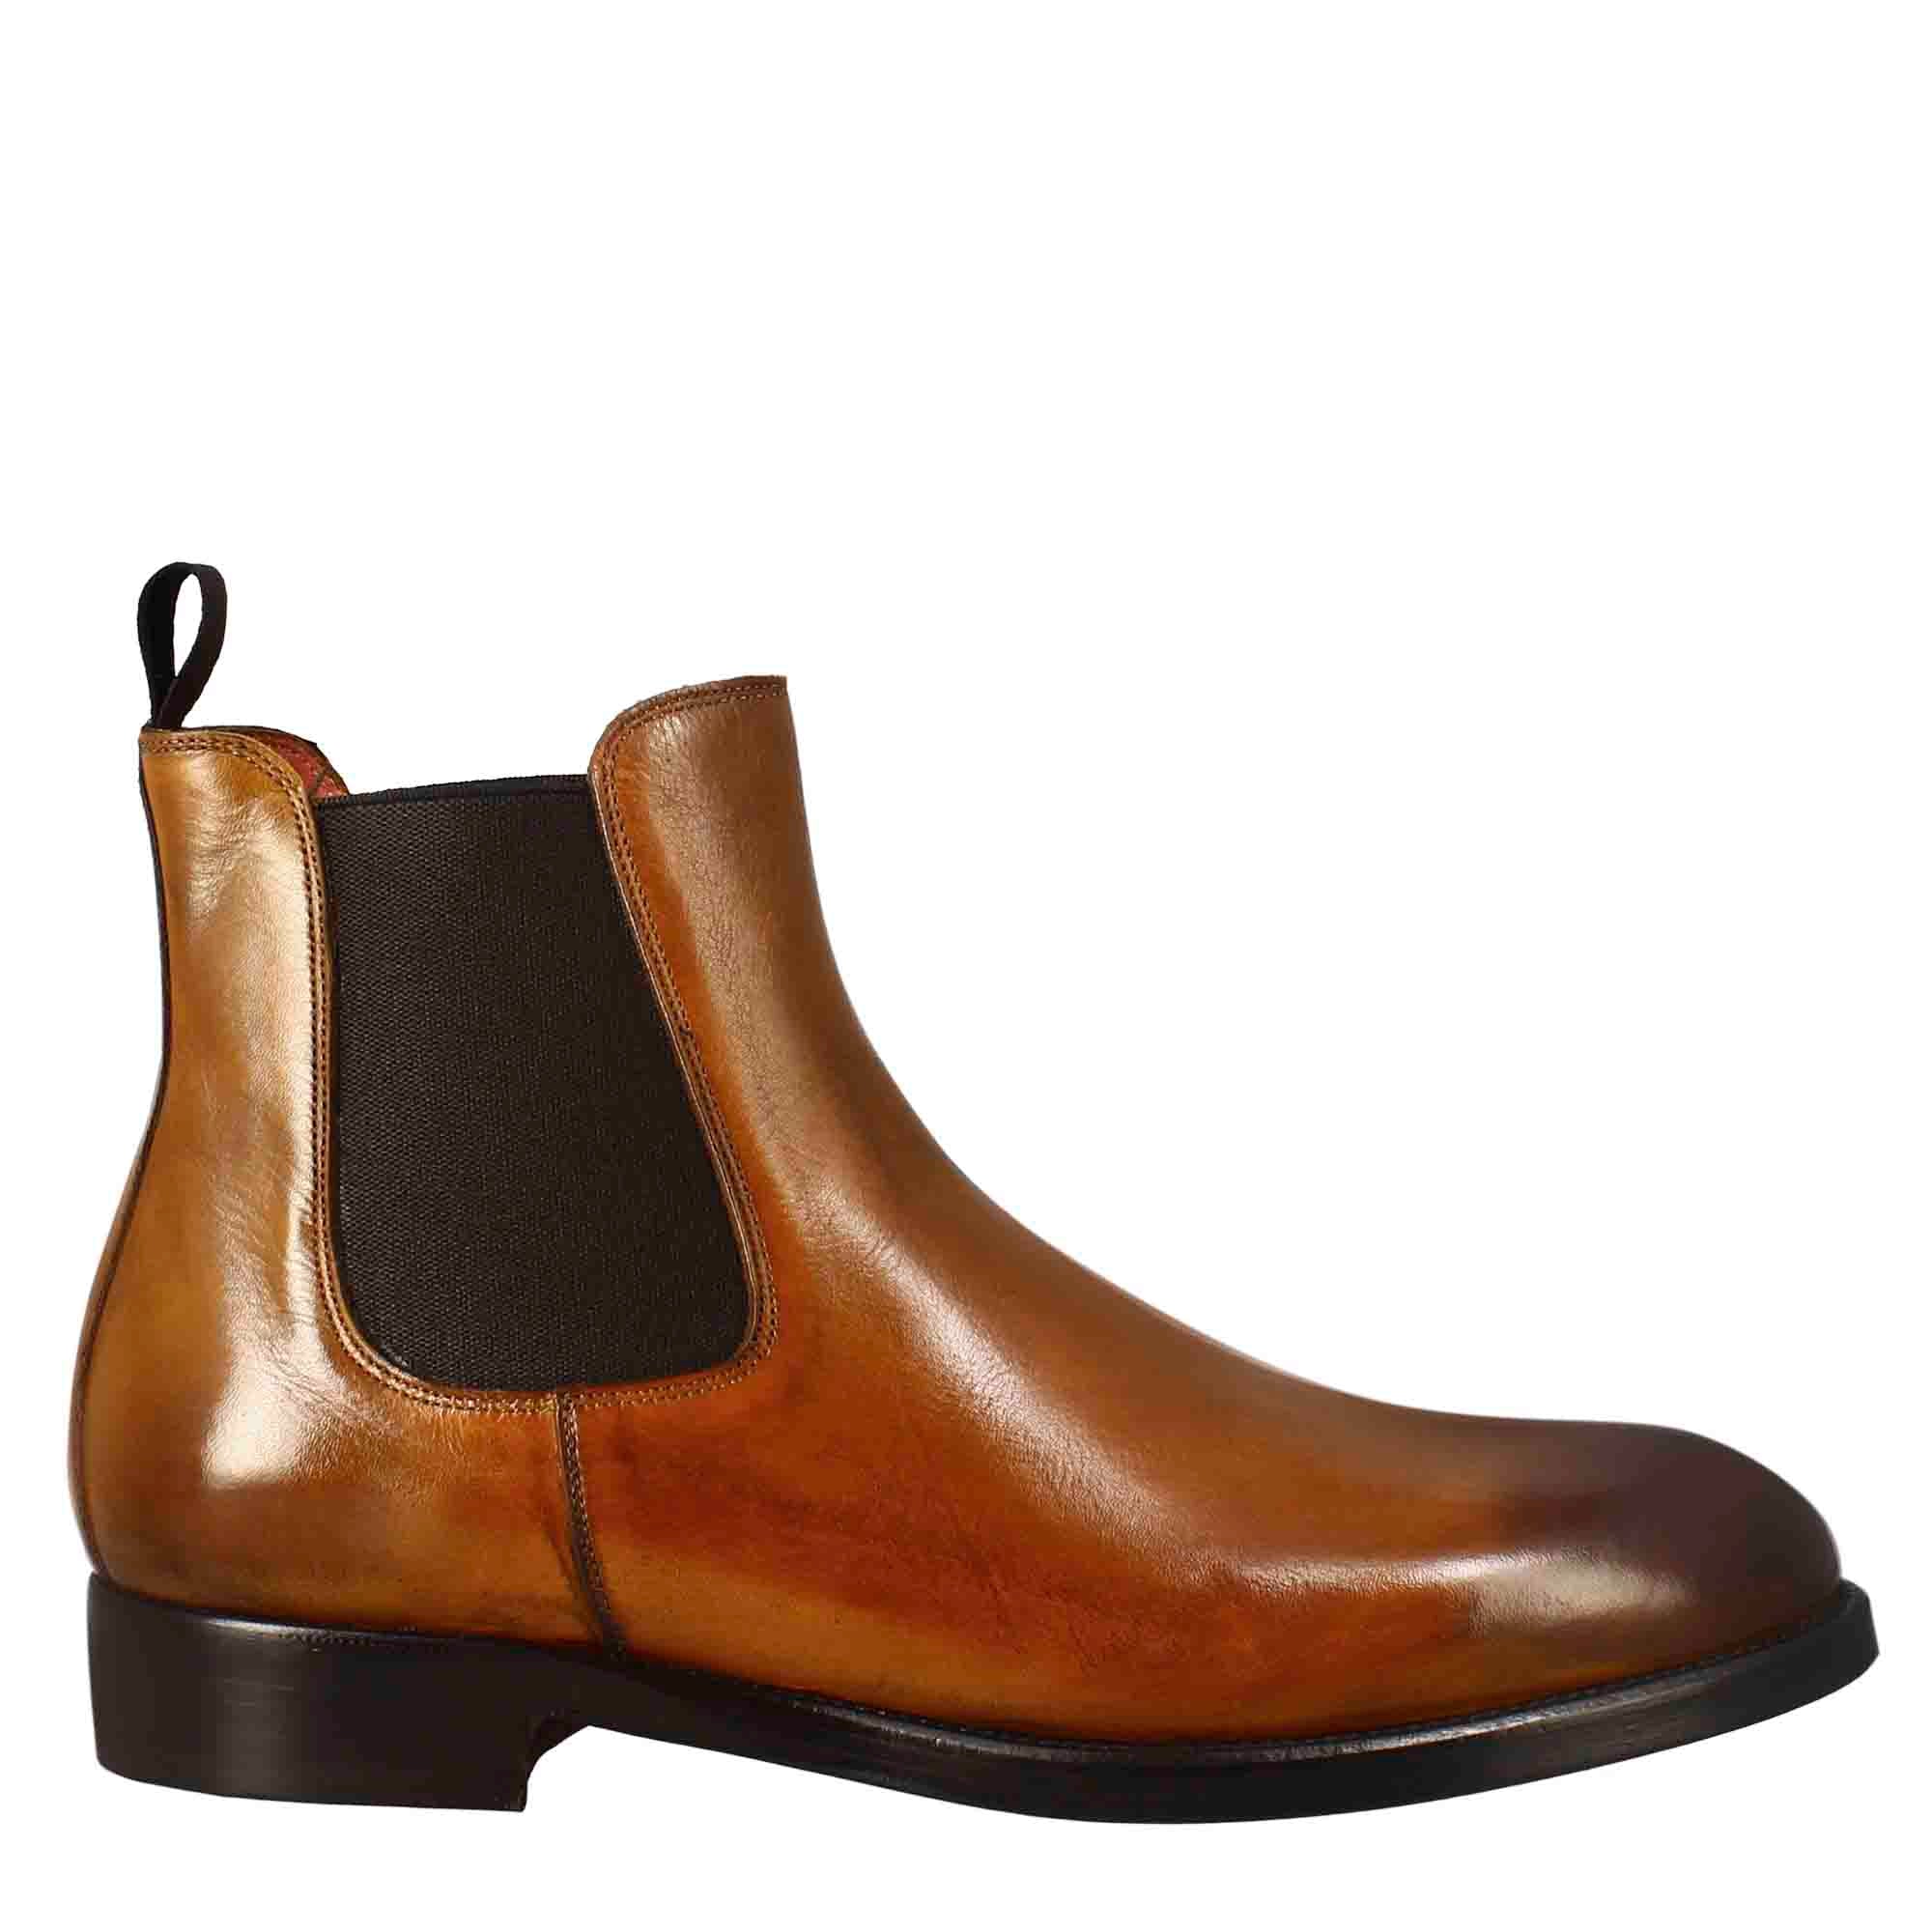 Chelsea Boots in Light Brown Leather